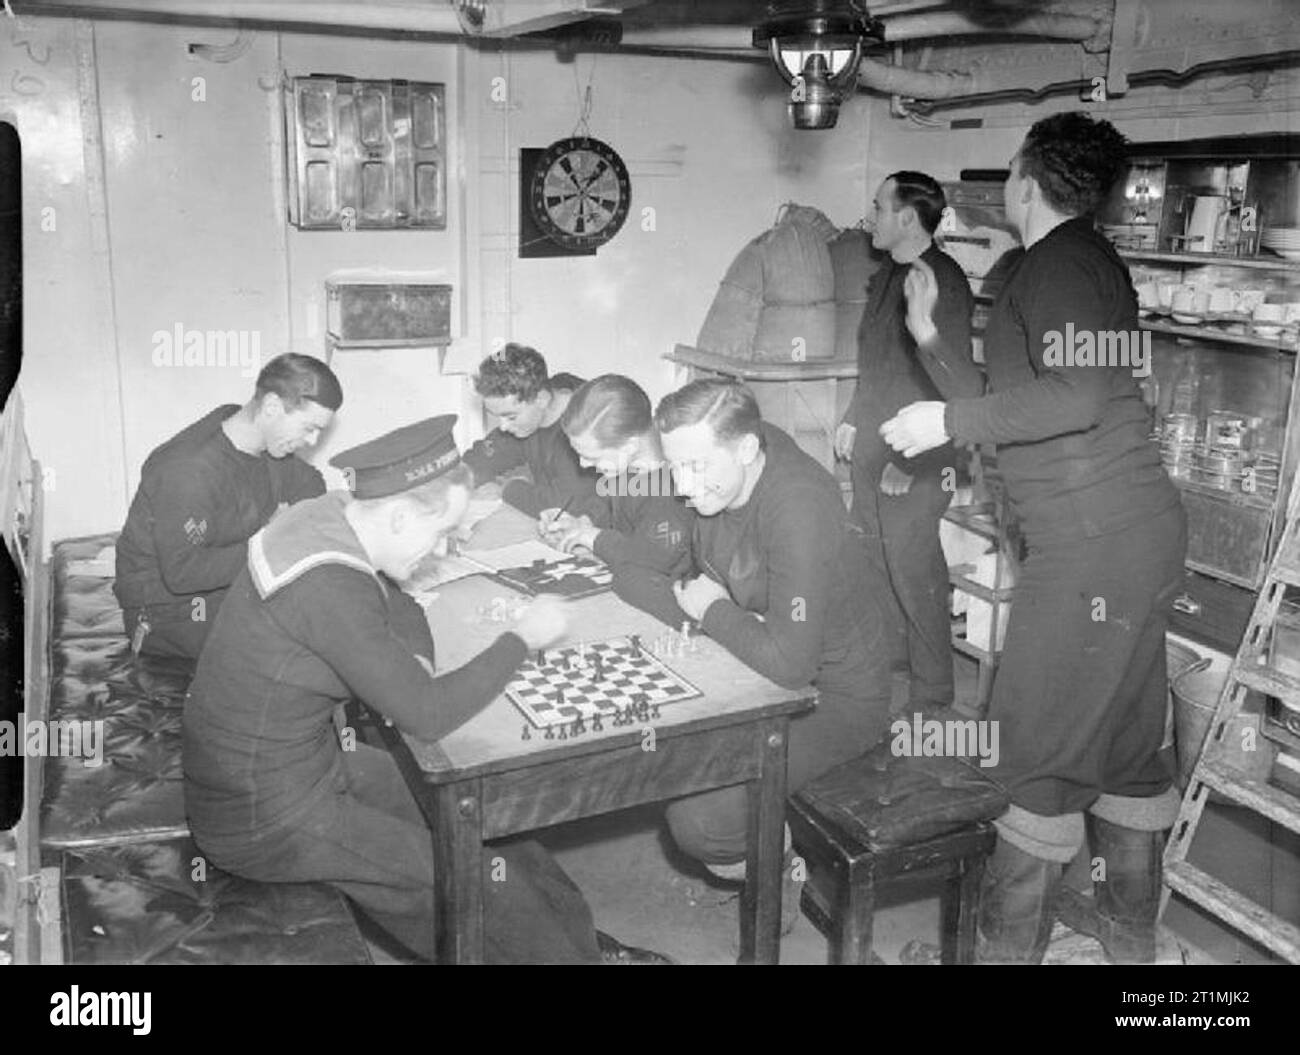 The Polish Navy during the Second World War The Foreigners' Mess on board the Polish Navy destroyer ORP Piorun. The seven British ratings in the mess they have to themselves, left to right: coder (who kept a boarding house in civilian life), signalman (Bank of England clerk), signalman (timber merchant), and telegraphist and signalman (regulars). Playing darts are the anti-U-boat worker and HO signalman, while the other men are playing chess or writing letters. The anti-sub man was awarded the DSM for his work. Stock Photo